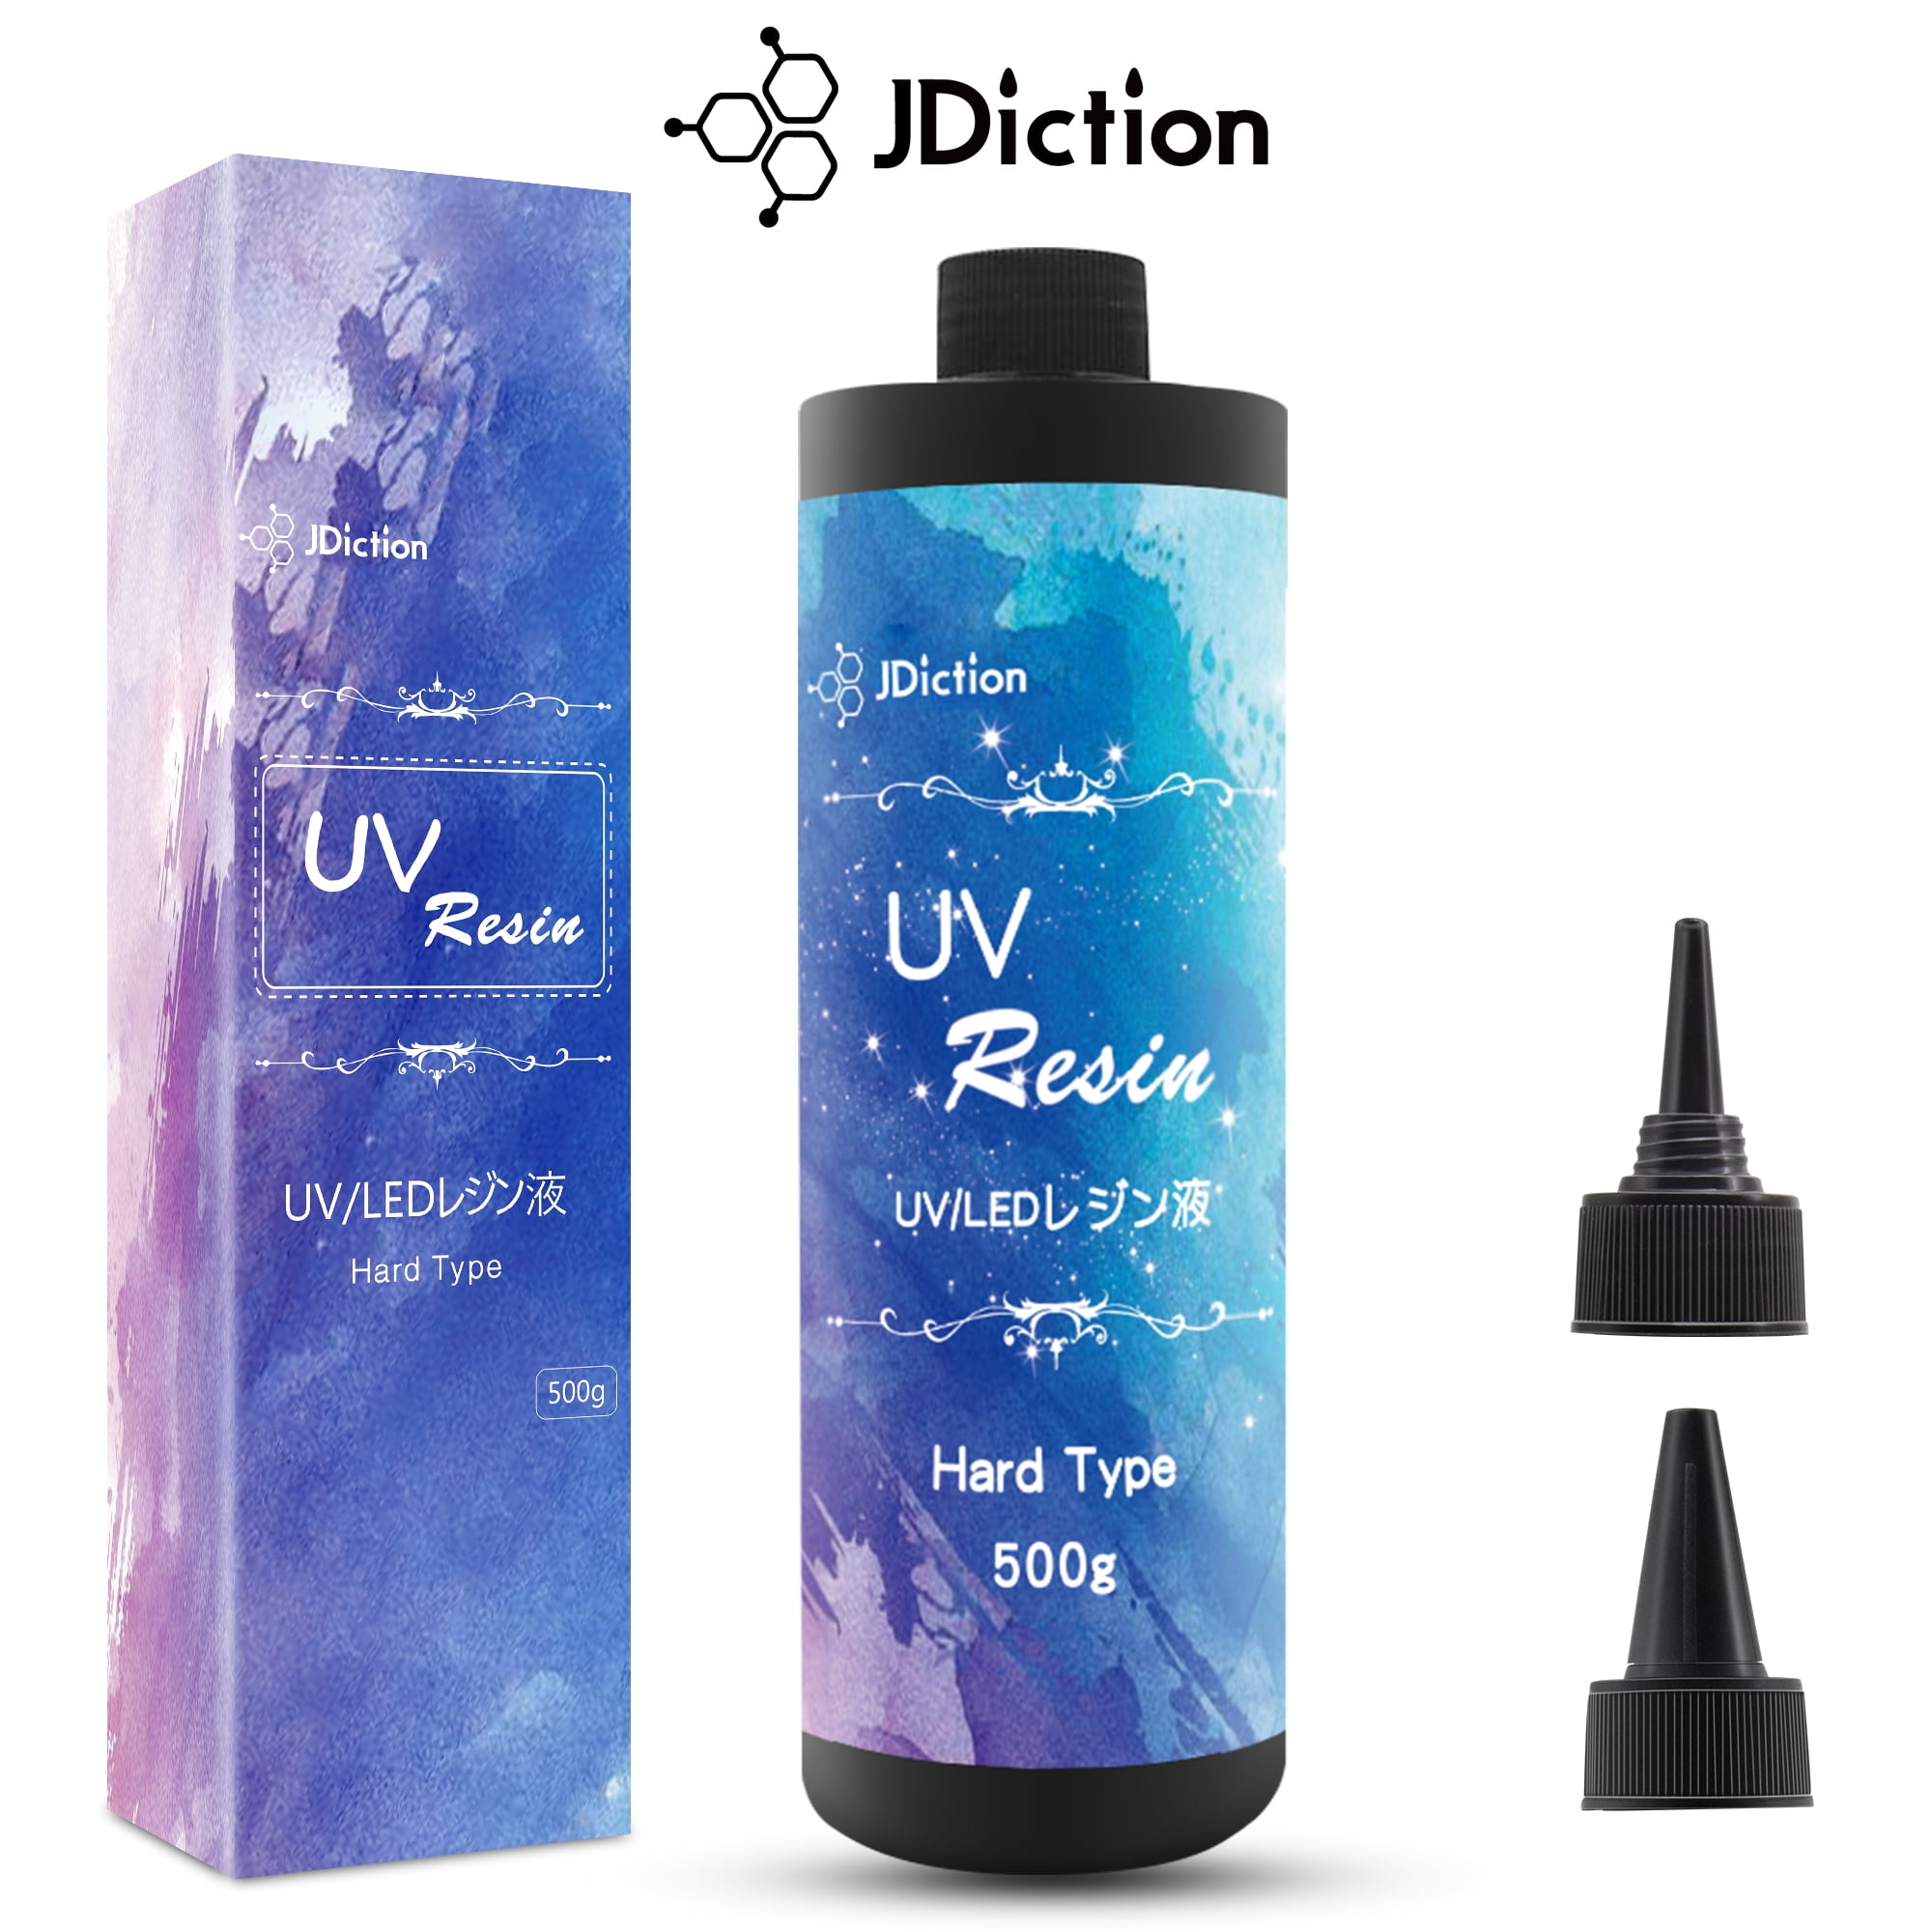 JDiction UV Resin Hard 500g-Clear UV Glue Resin Kit UV Fast Curing for  Crafts Jewelry/Earring Making Casting